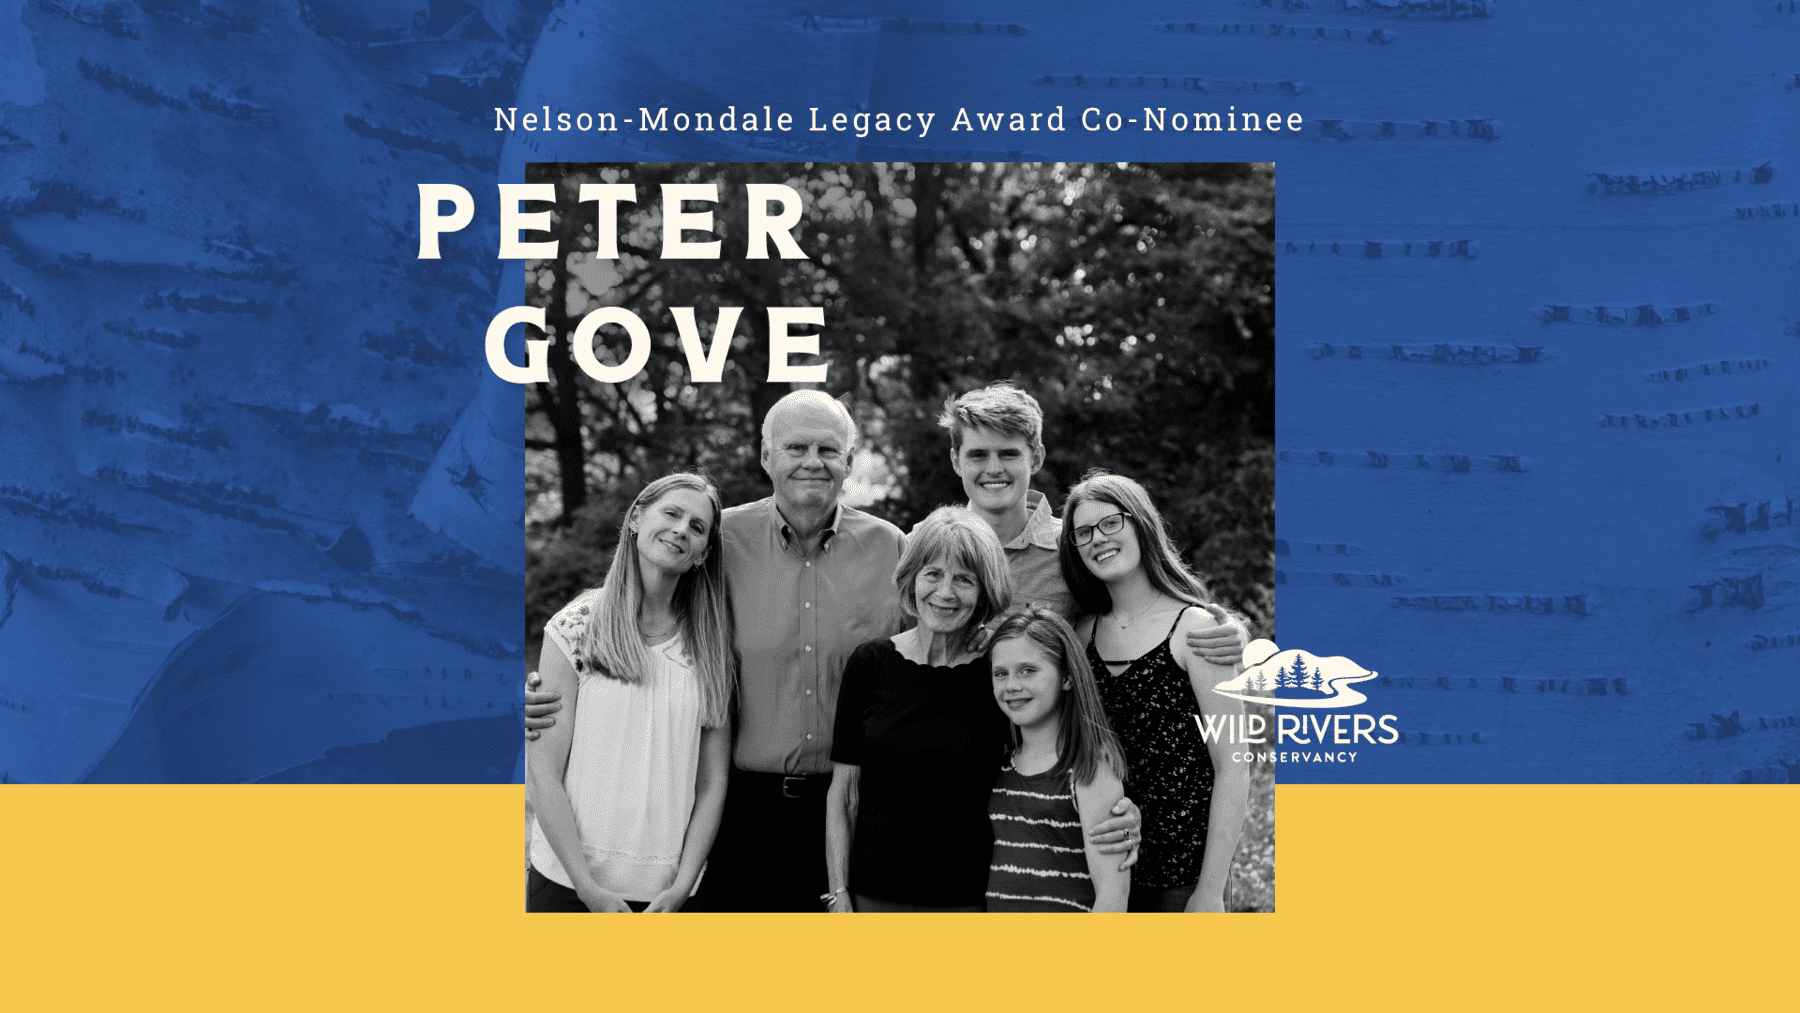 Nelson-Mondale Legacy Award Co-Nominee Peter Gove